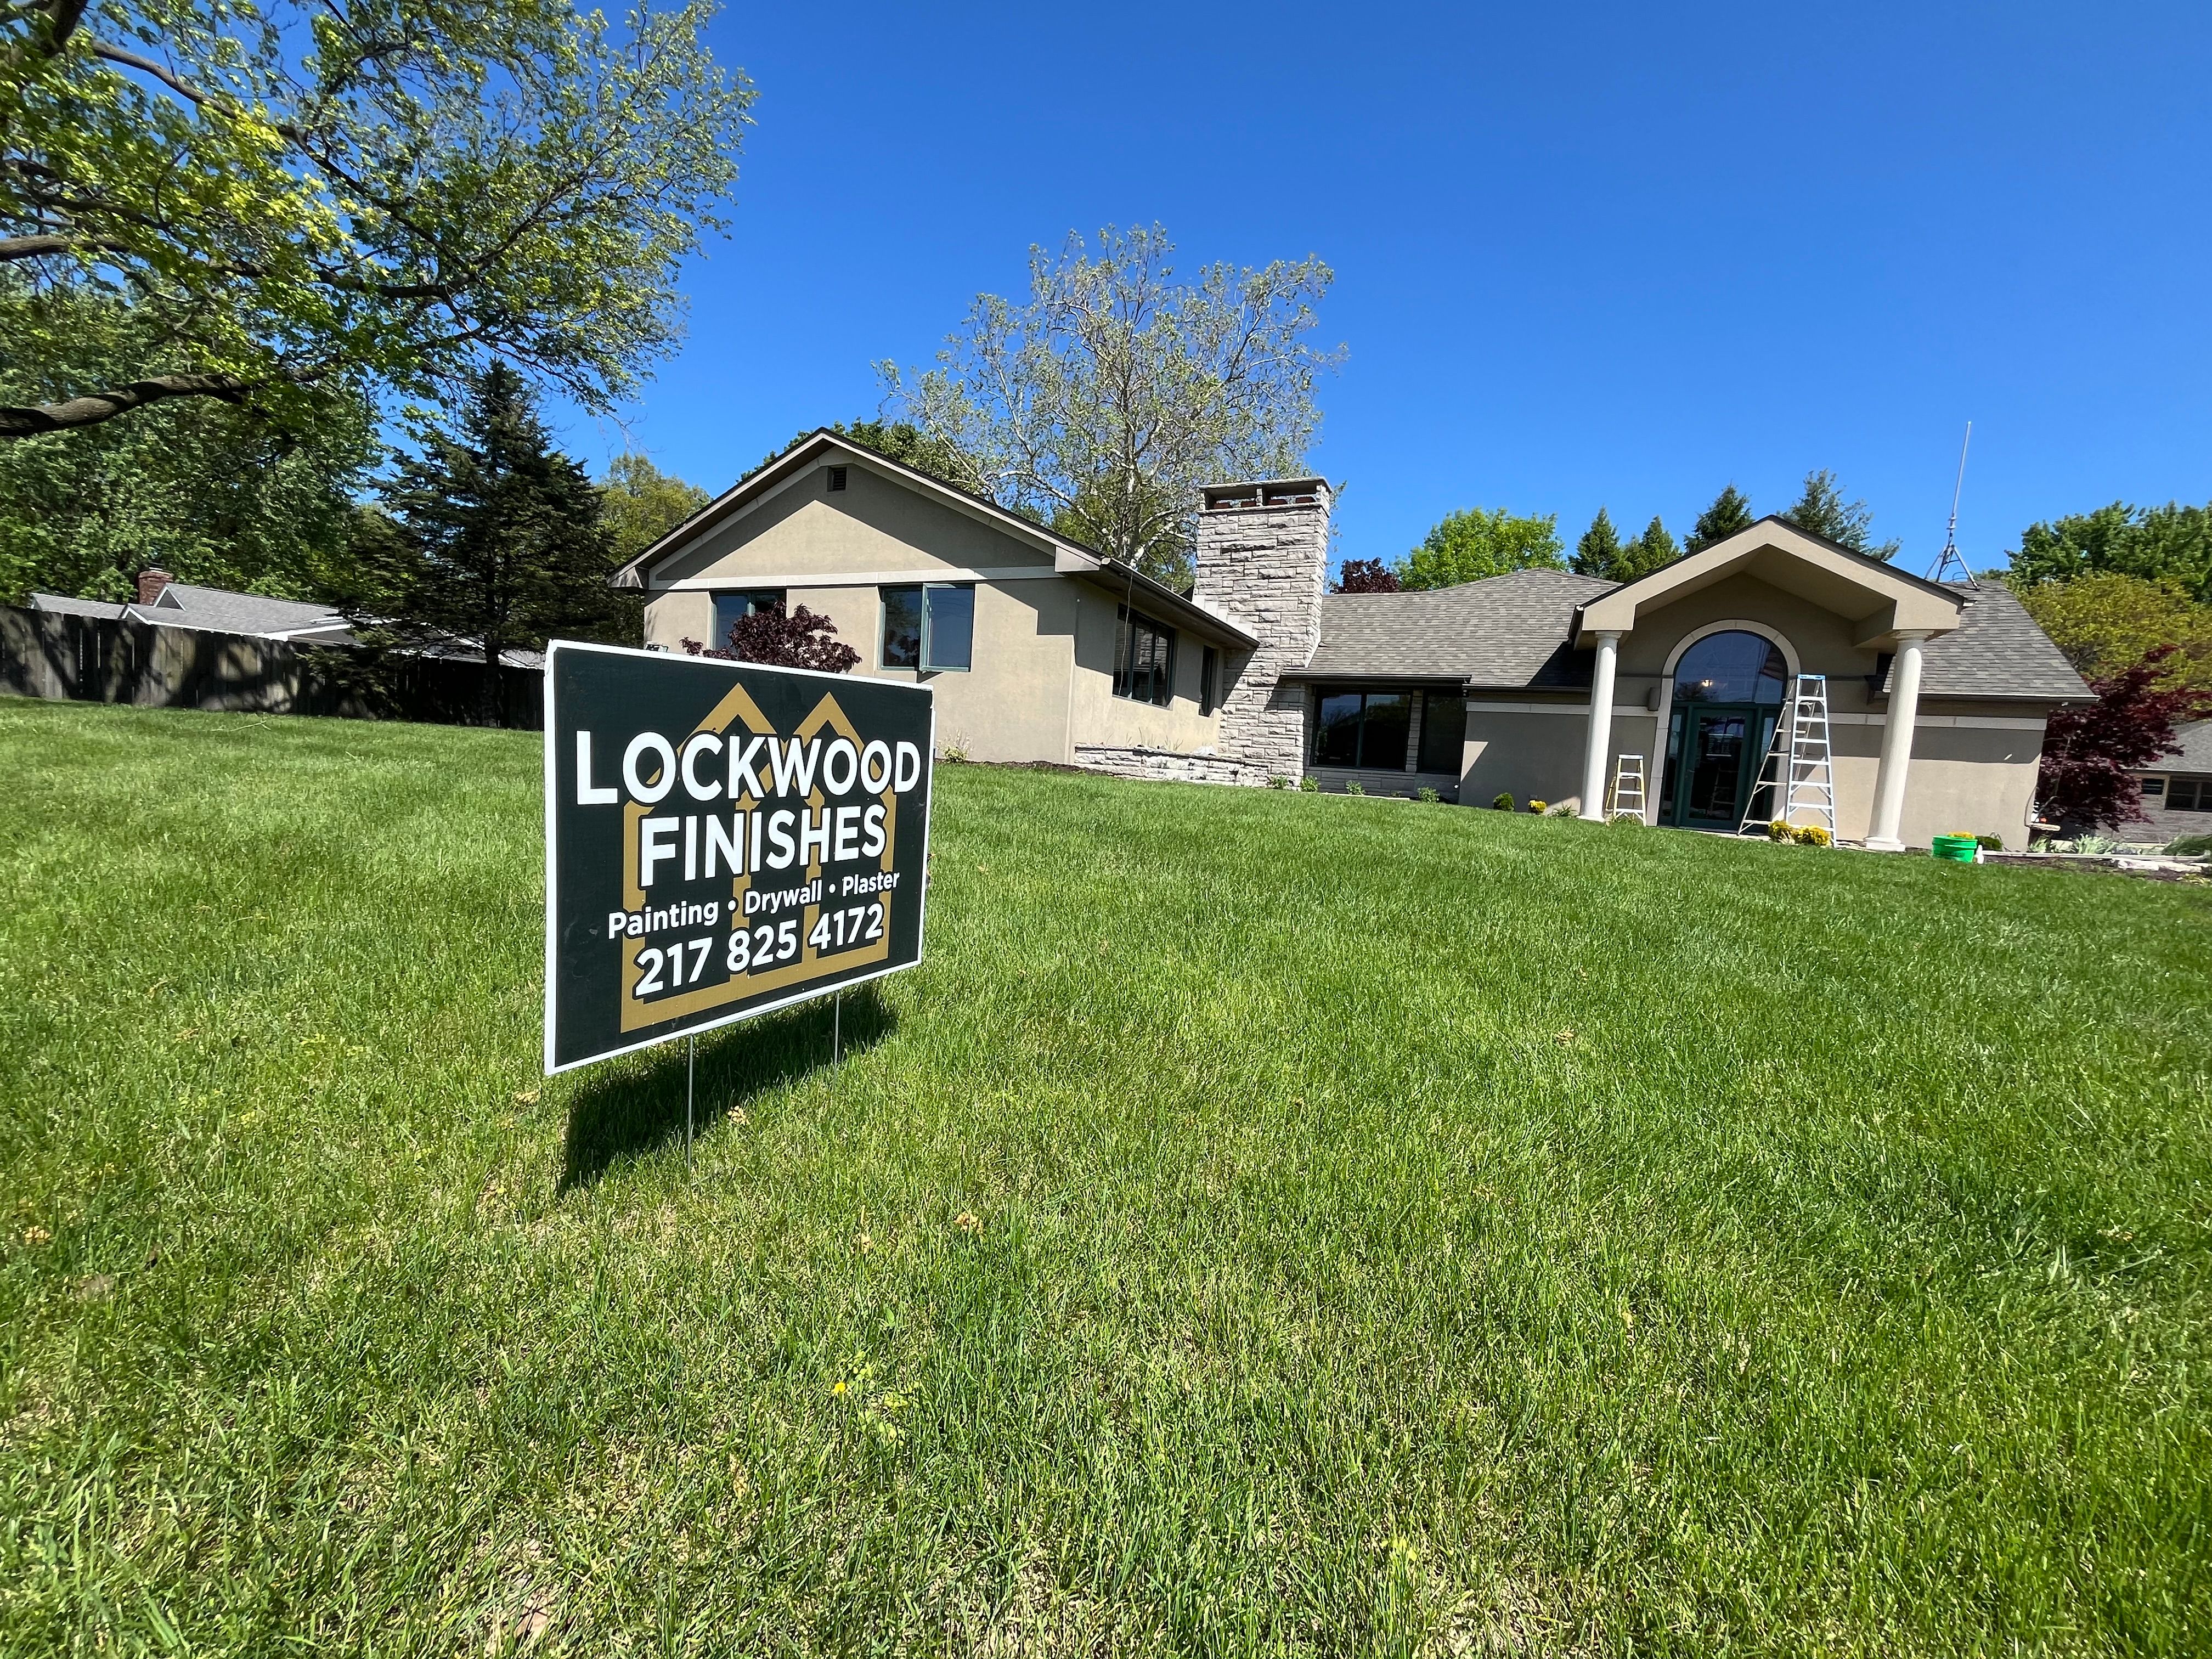 All Photos for LOCKWOOD FINISHES in Springfield, IL